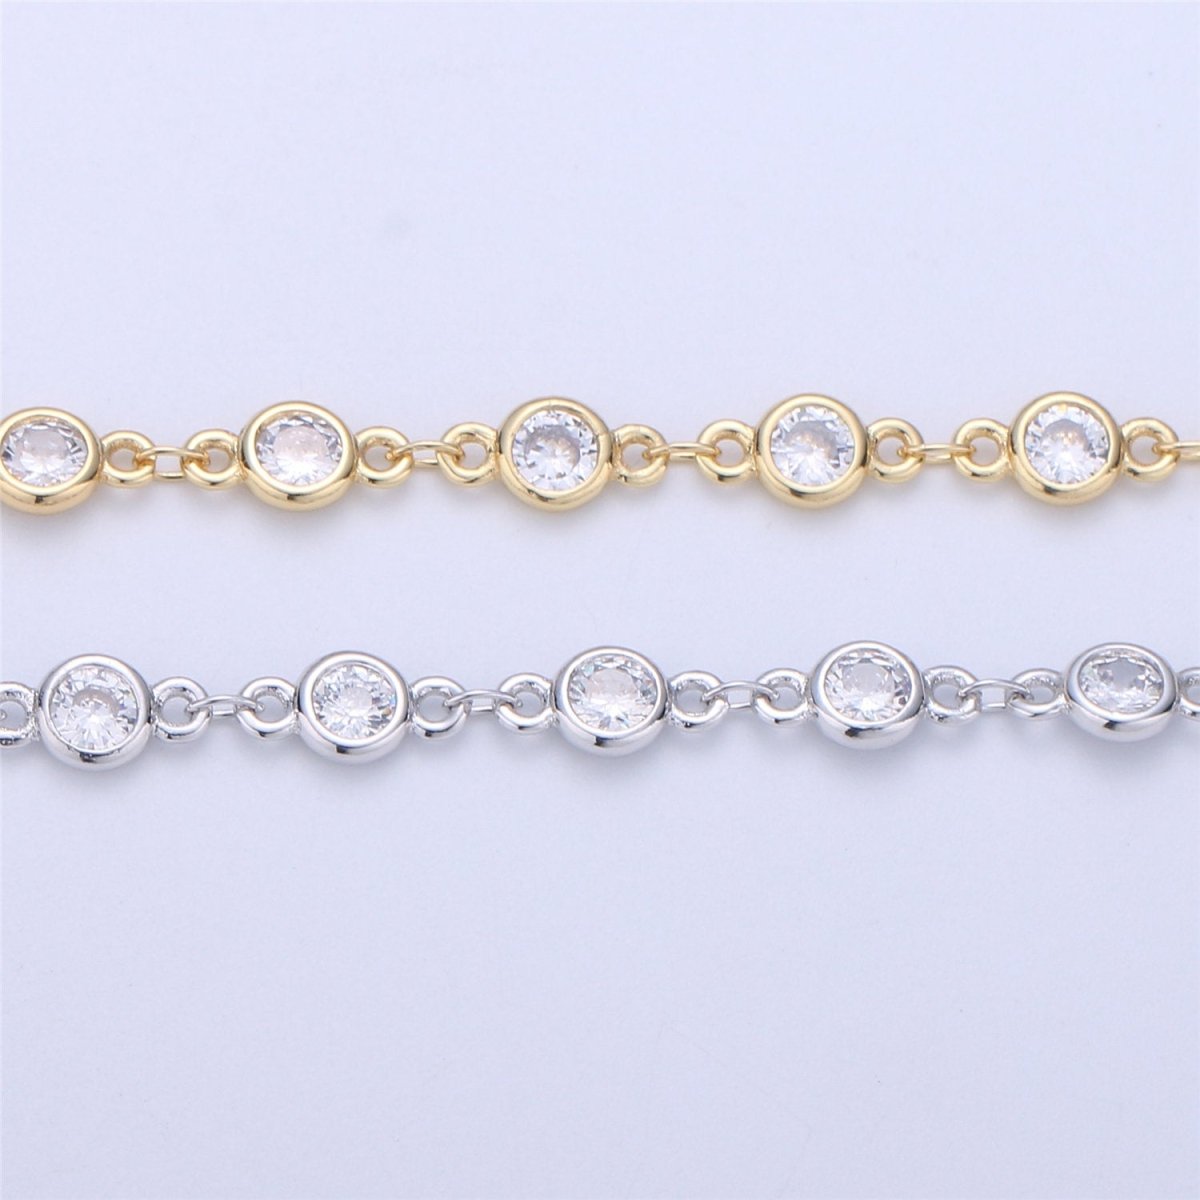 24K Gold Filled Chain Round CZ Chain by Yard, Bulk Chain by Yard, Cubic Chain, Tiny CZ Chain, Ideal for Lariet Long Necklace, DESIGNED Chain Component Supply | ROLL-041, ROLL-047 Clearance Pricing - DLUXCA